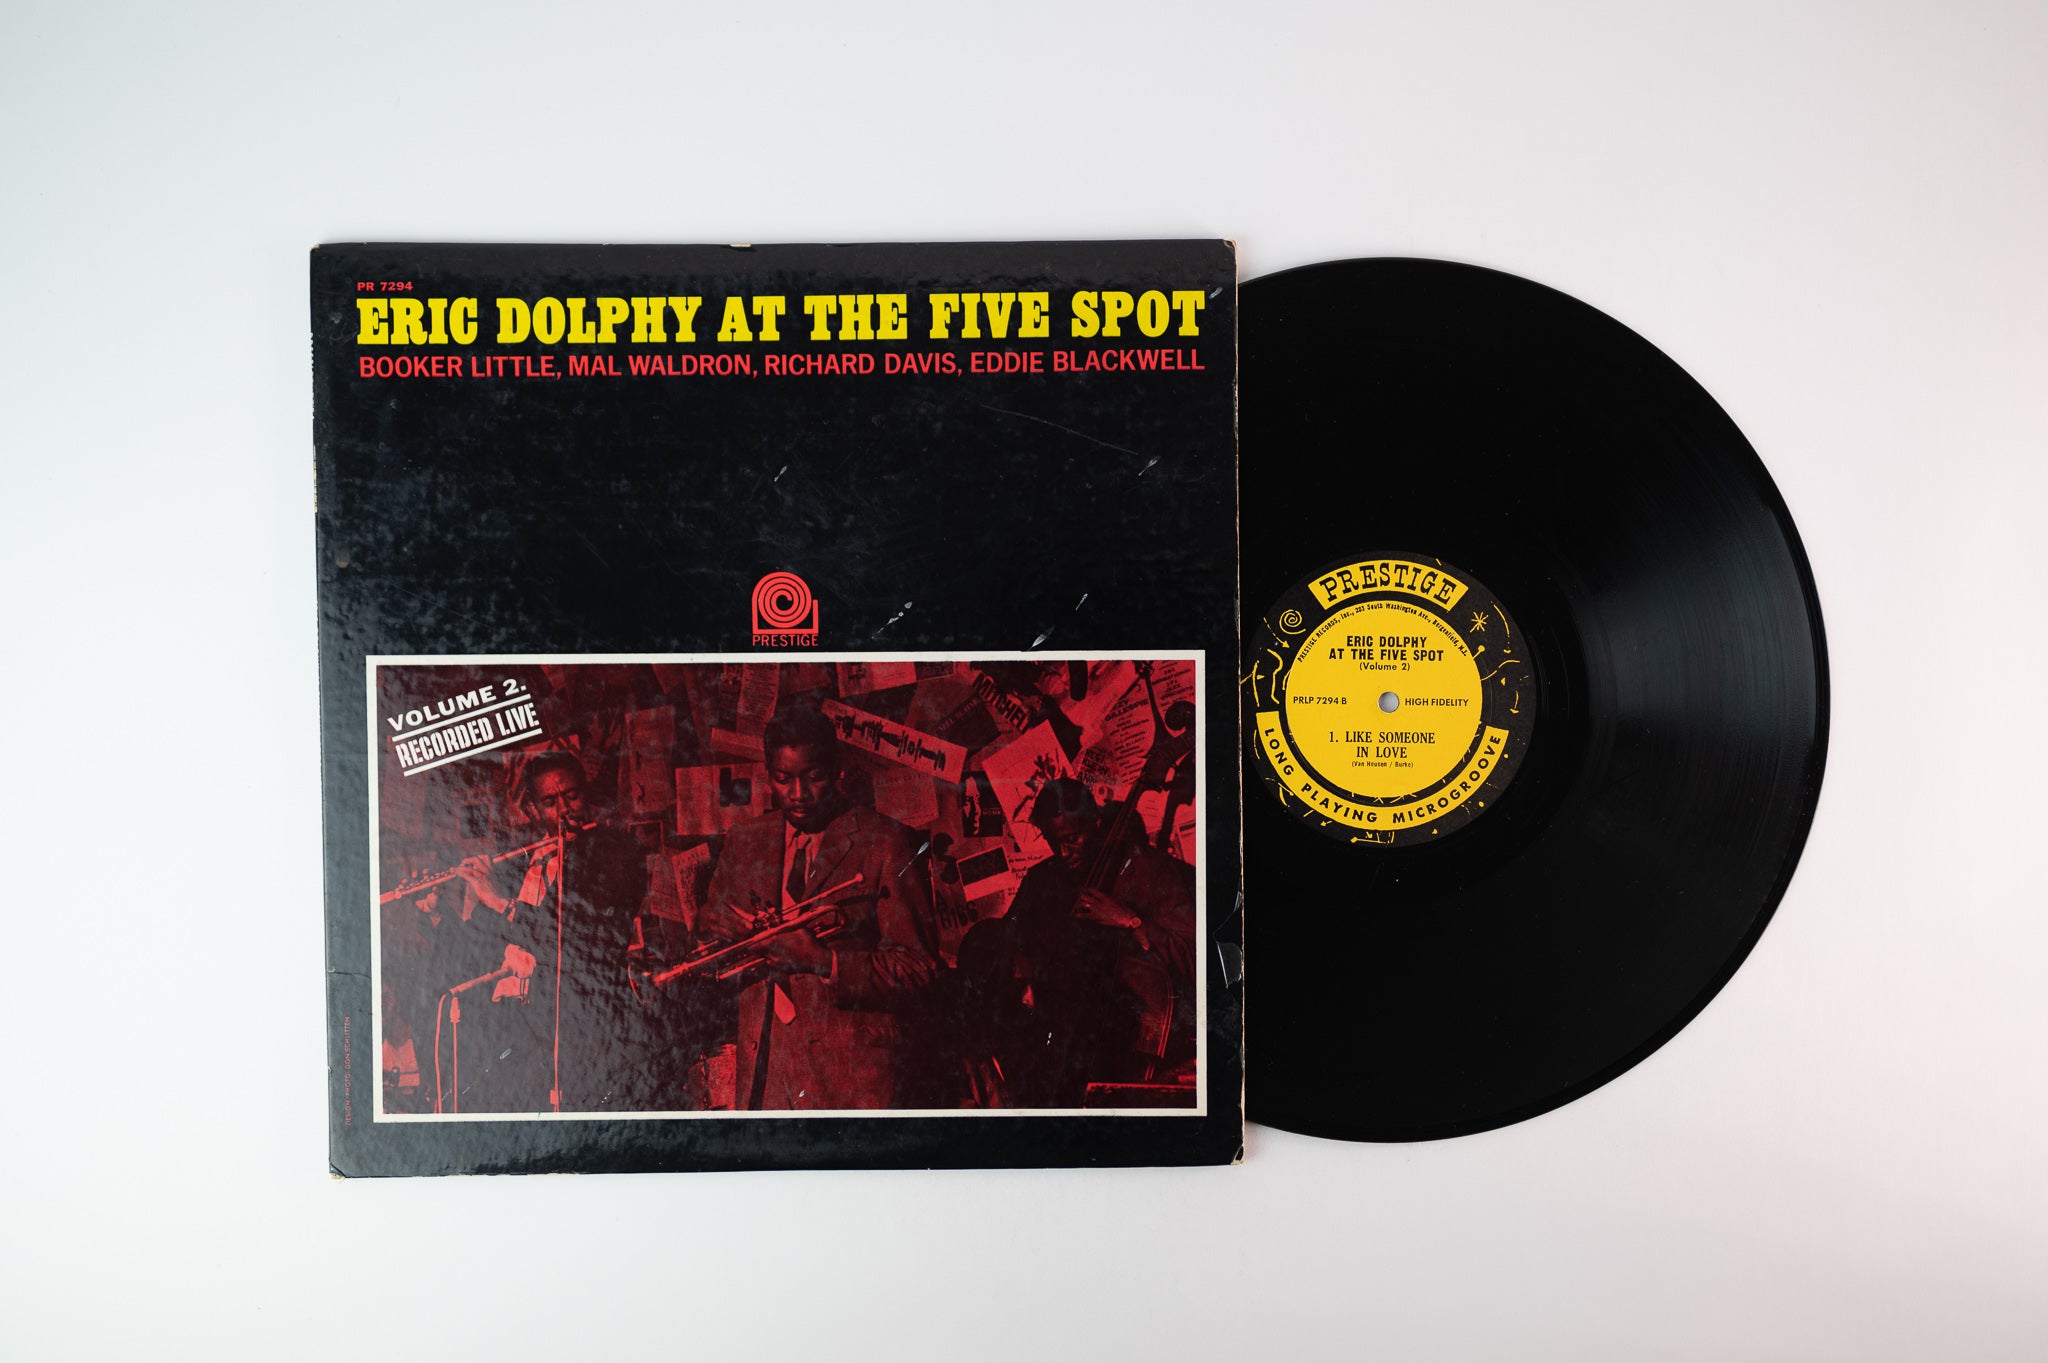 Eric Dolphy - At The Five Spot Volume 2 on Prestige Mono Bergenfield